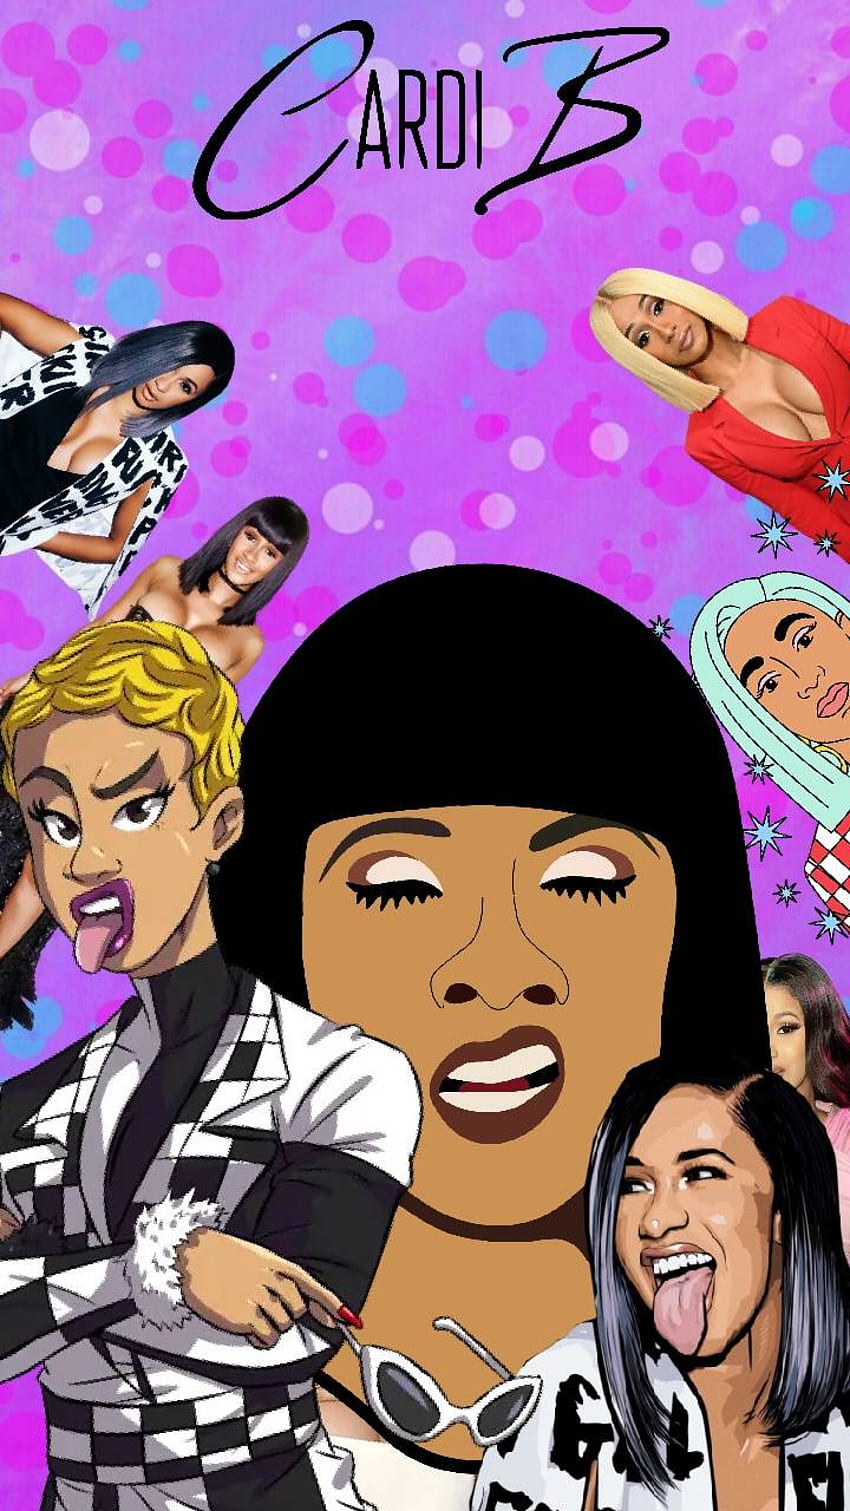 A poster for the album cardi b - Cardi B